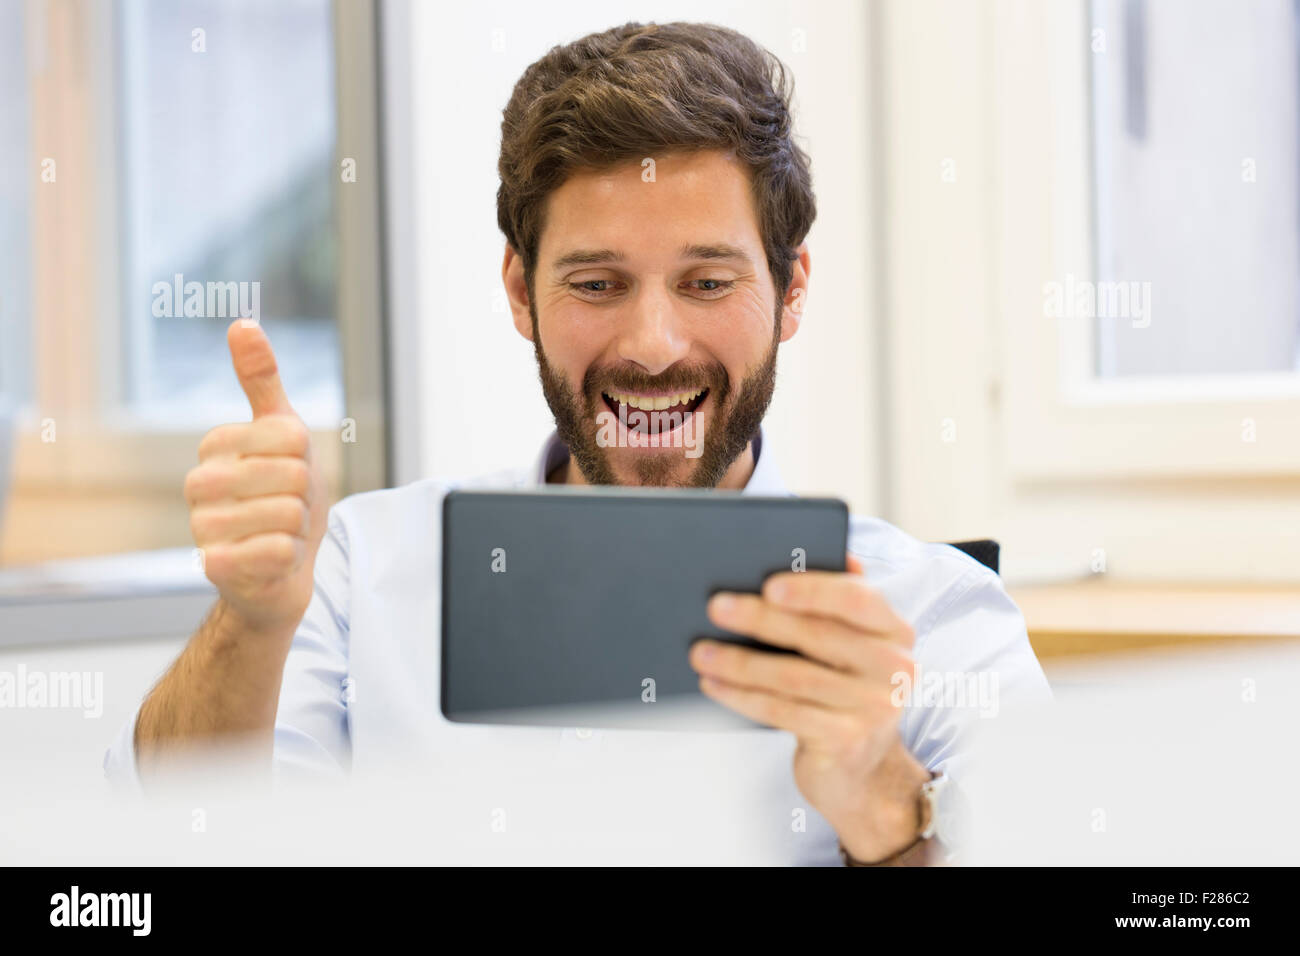 Cheering businessman with thumb up in office using digital tablet Stock Photo